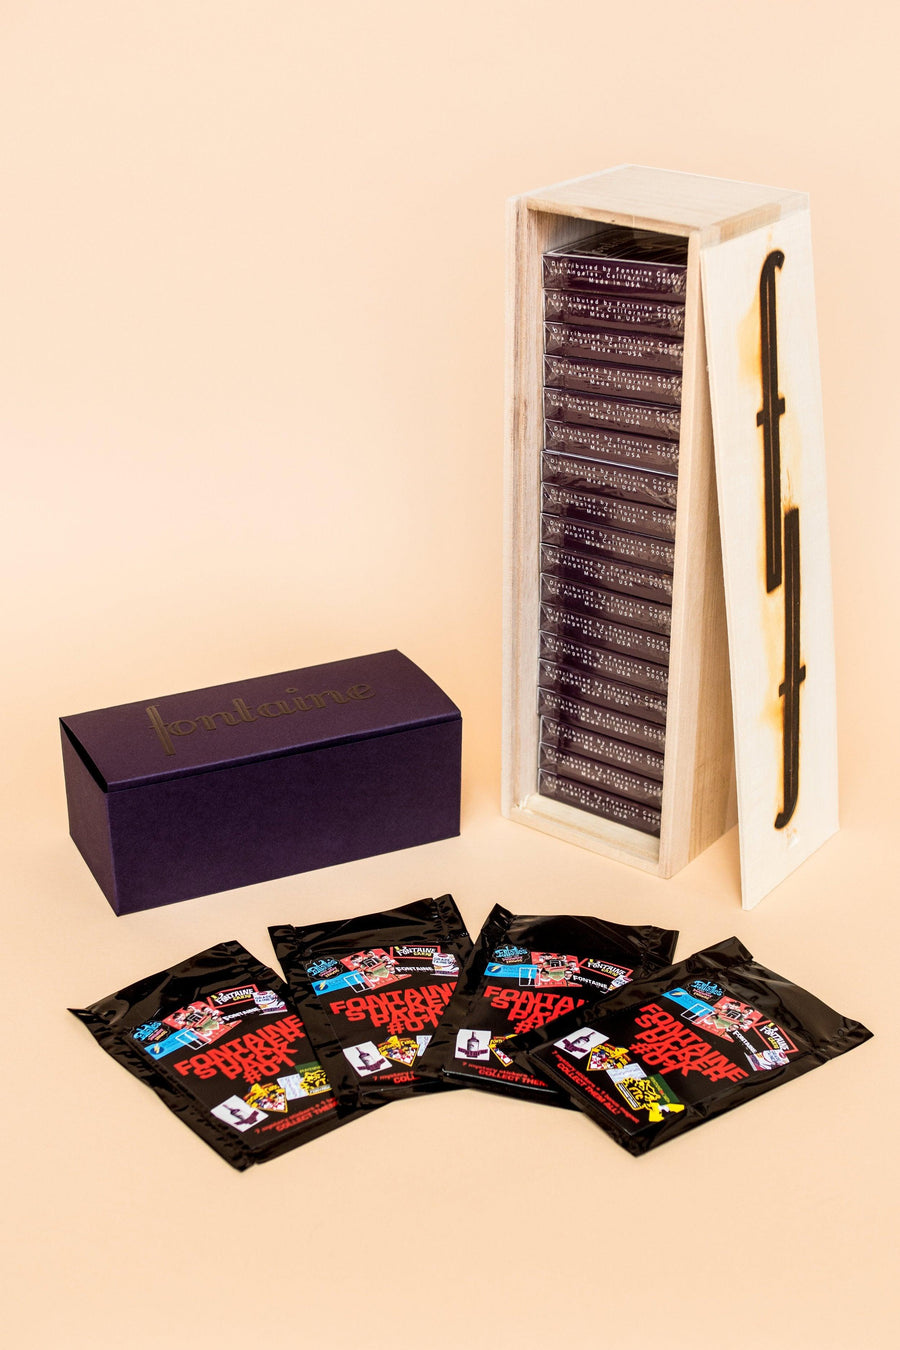 Fontaine Wine Edition Playing Cards by Fontaine